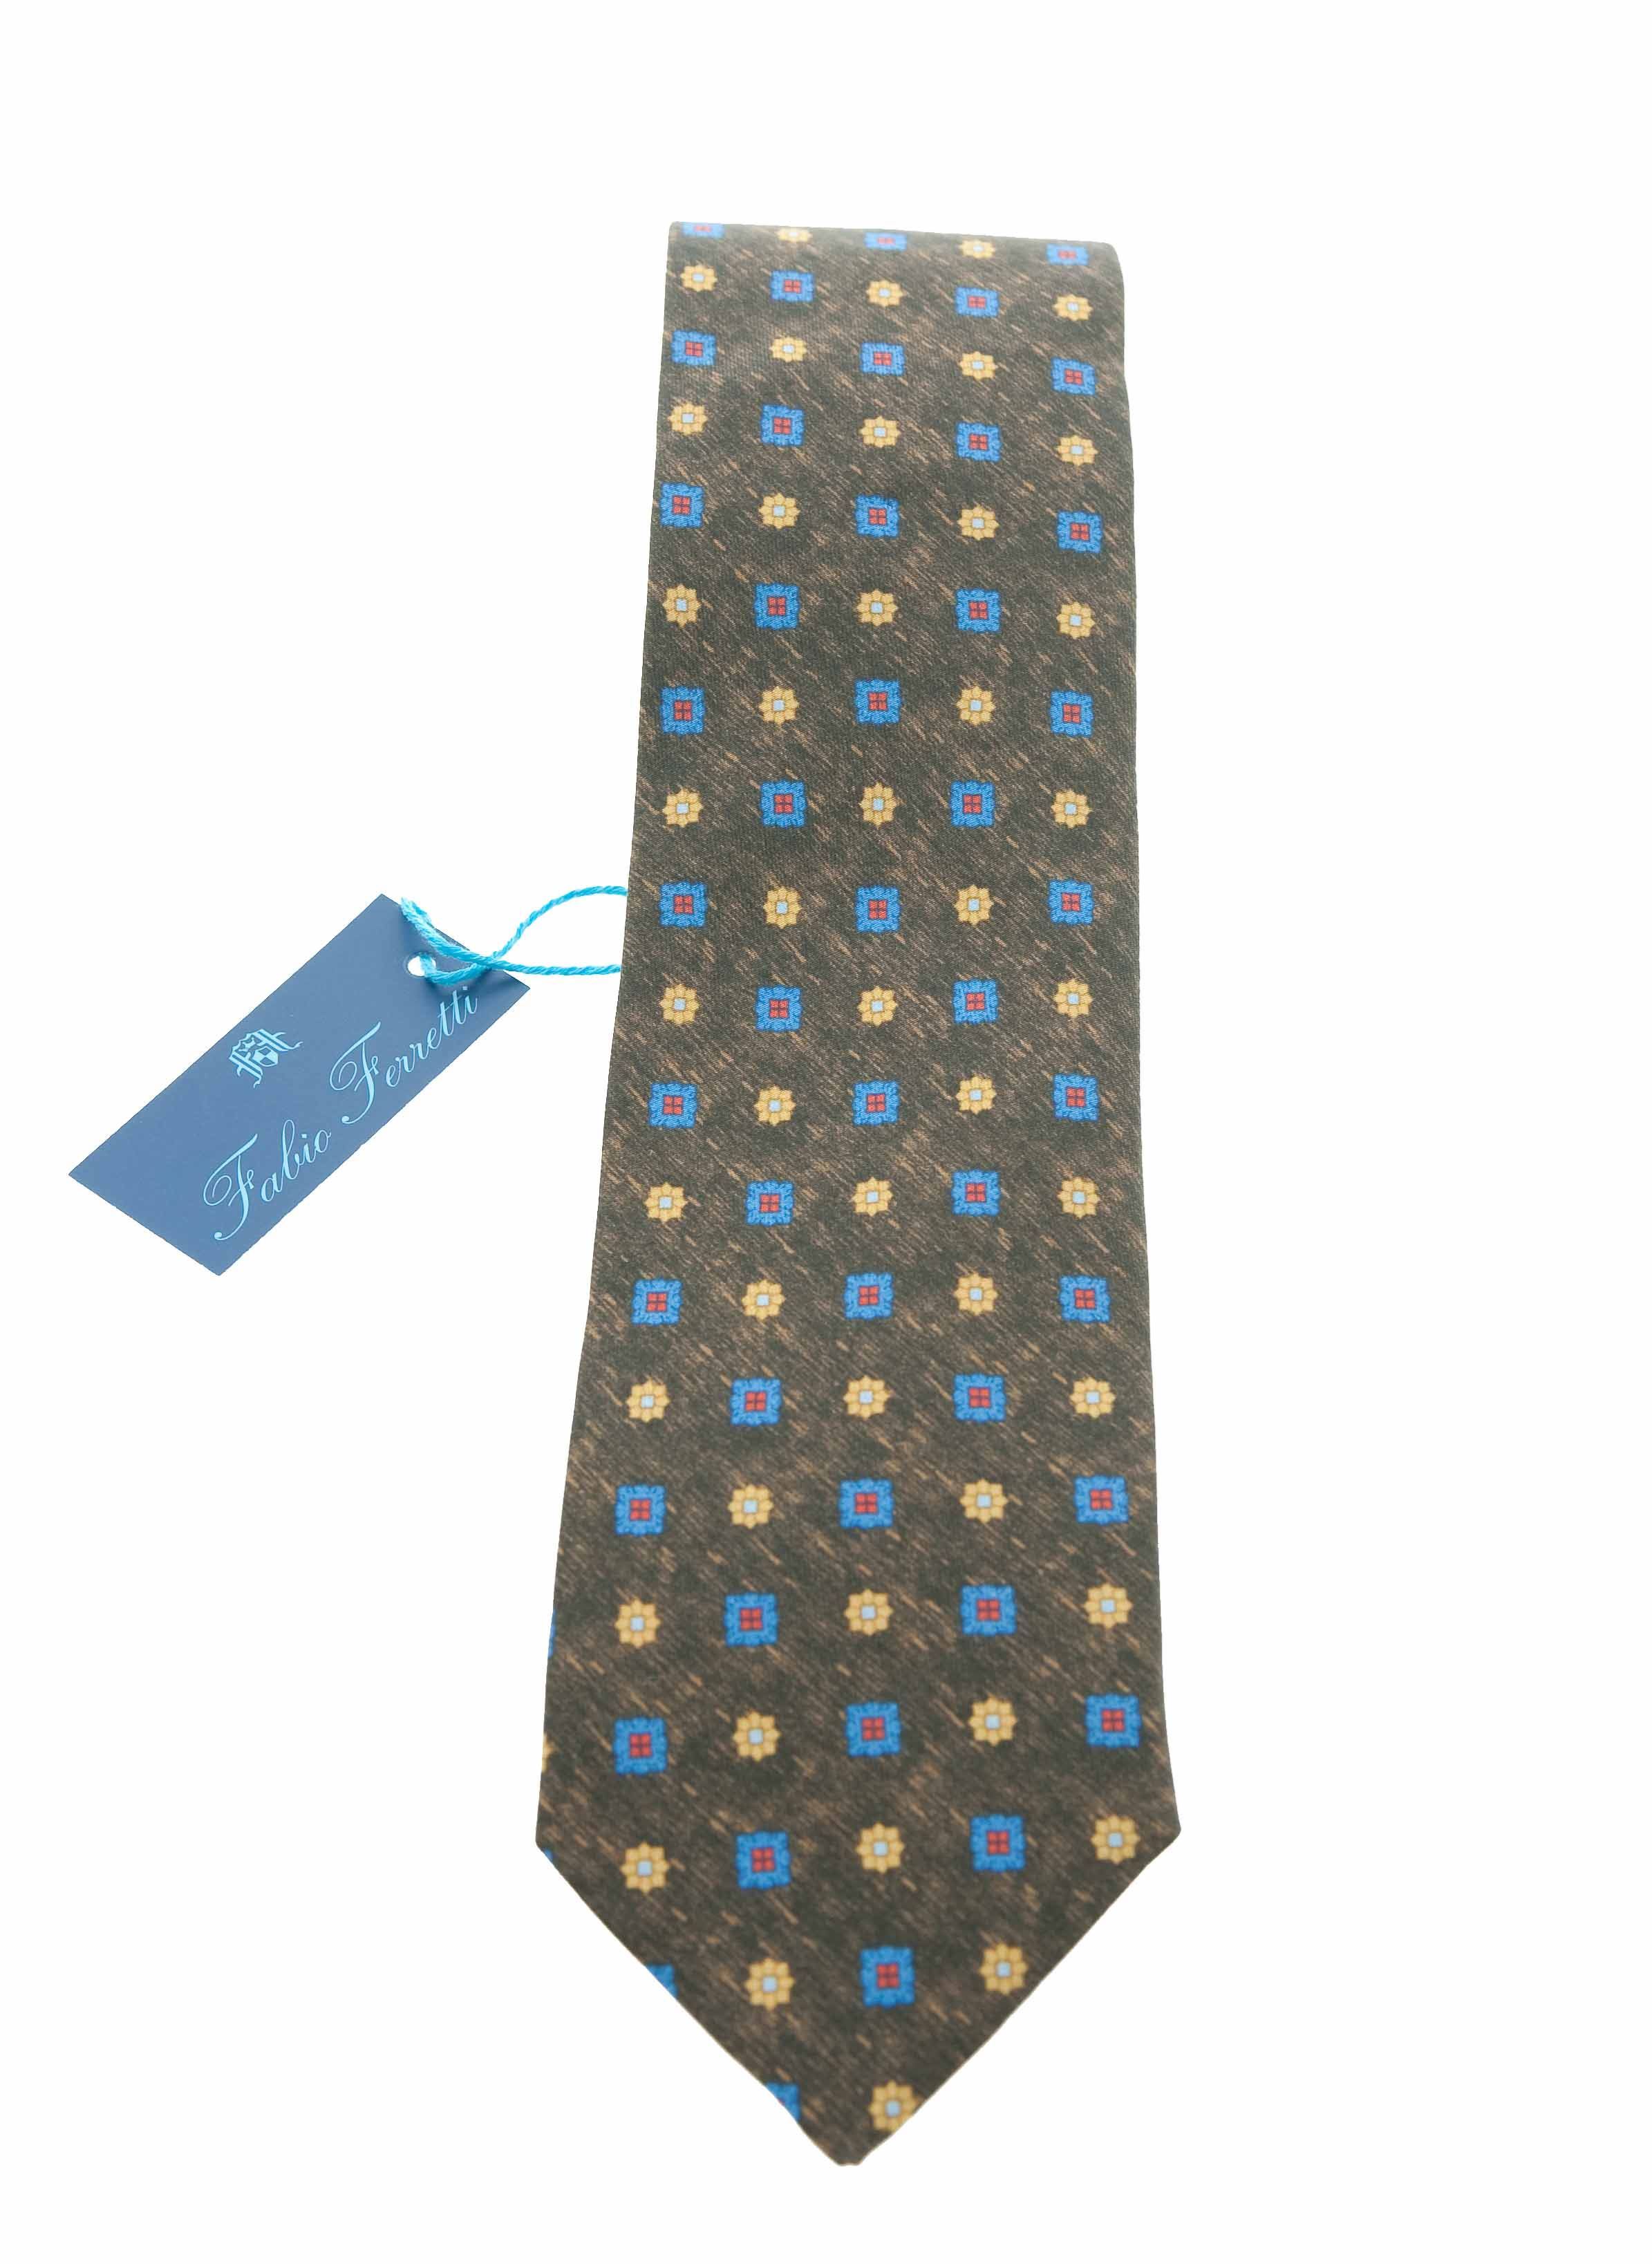 Picture of Silk tie